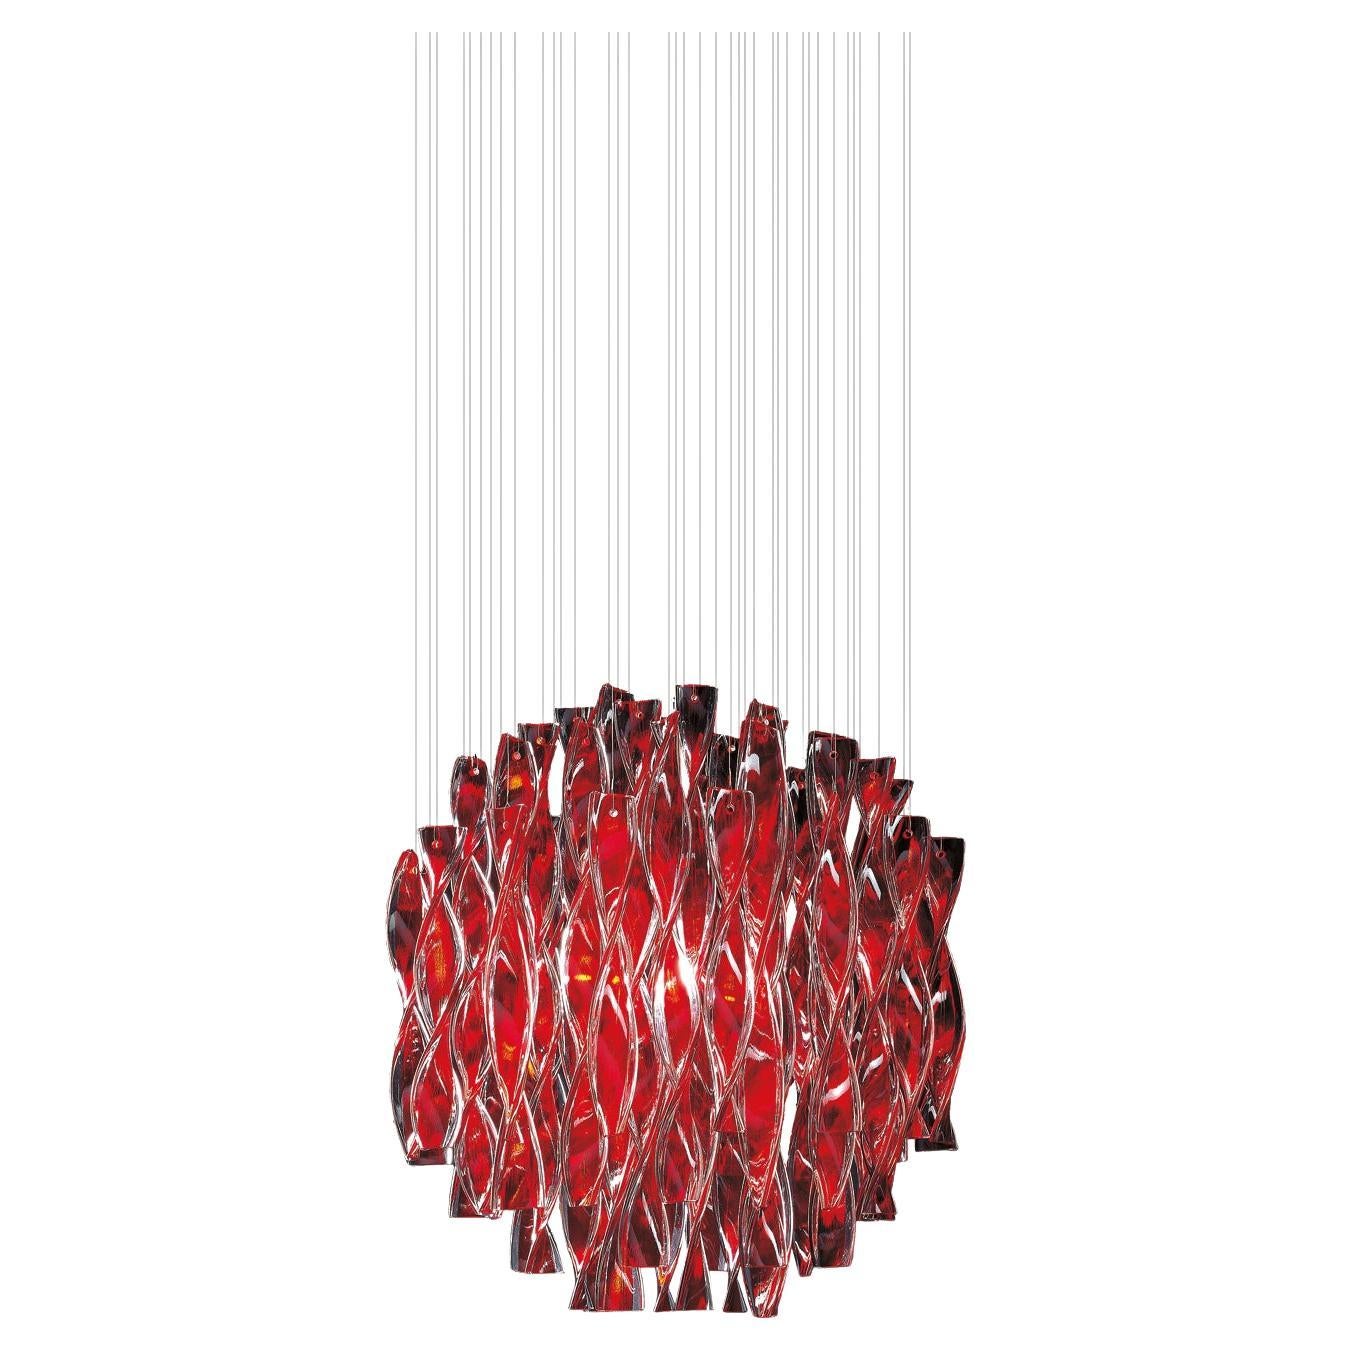 Axolight Avir Large Pendant Lamp in Chrome and Red by Manuel & Vanessa Vivian For Sale